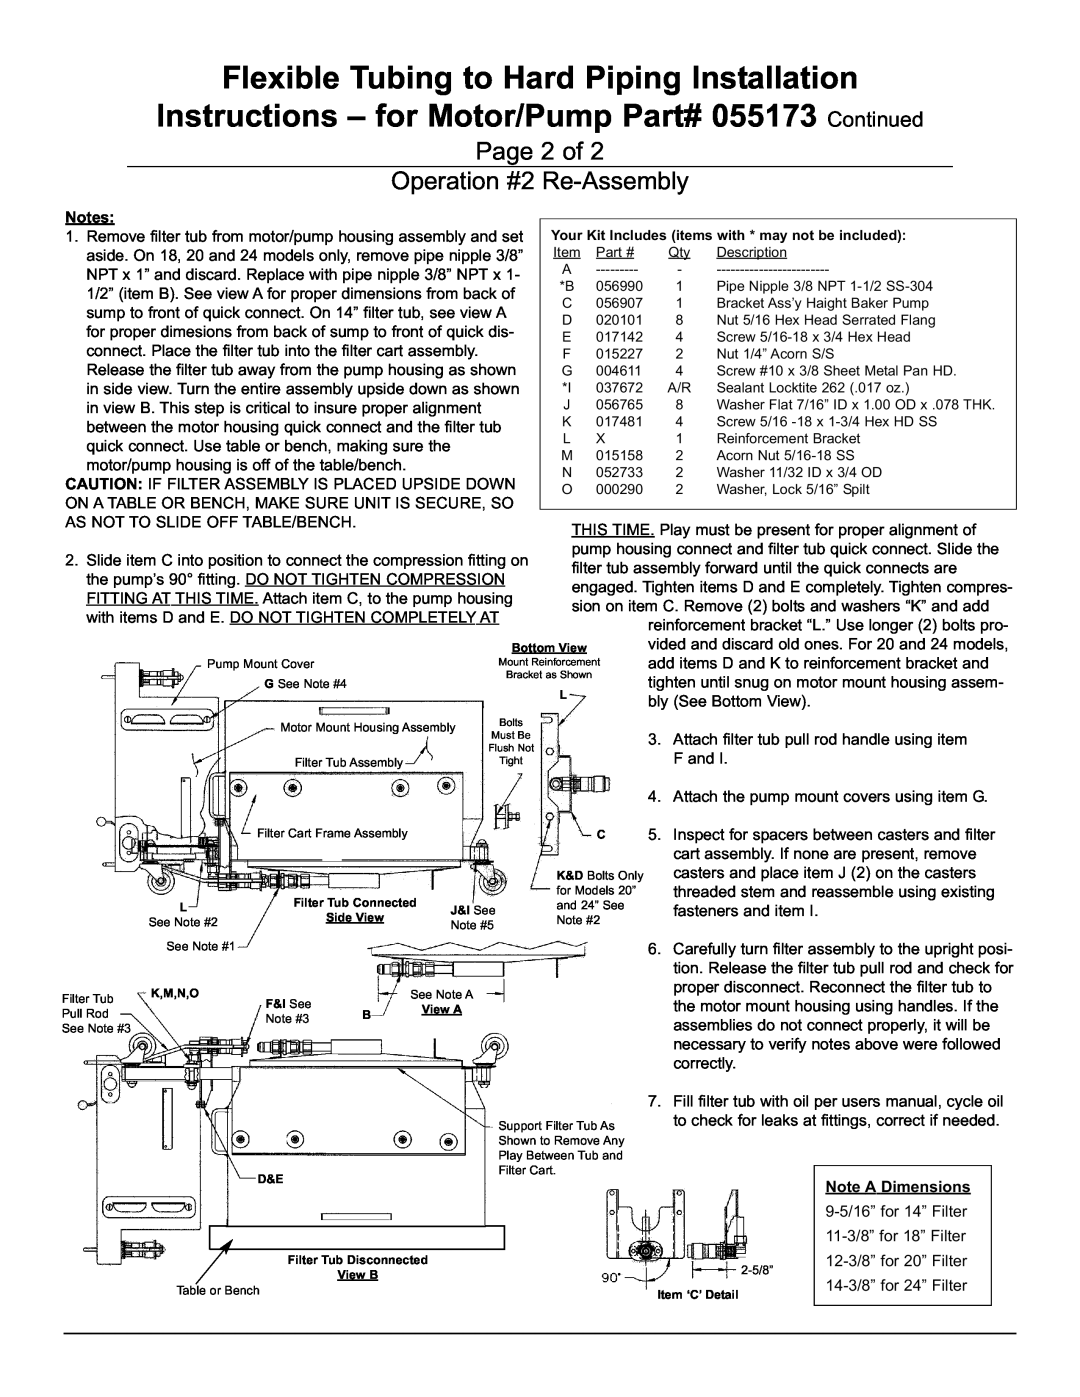 Keating Of Chicago 055173 installation instructions Page 2 of Operation #2 Re-Assembly, Note A Dimensions 